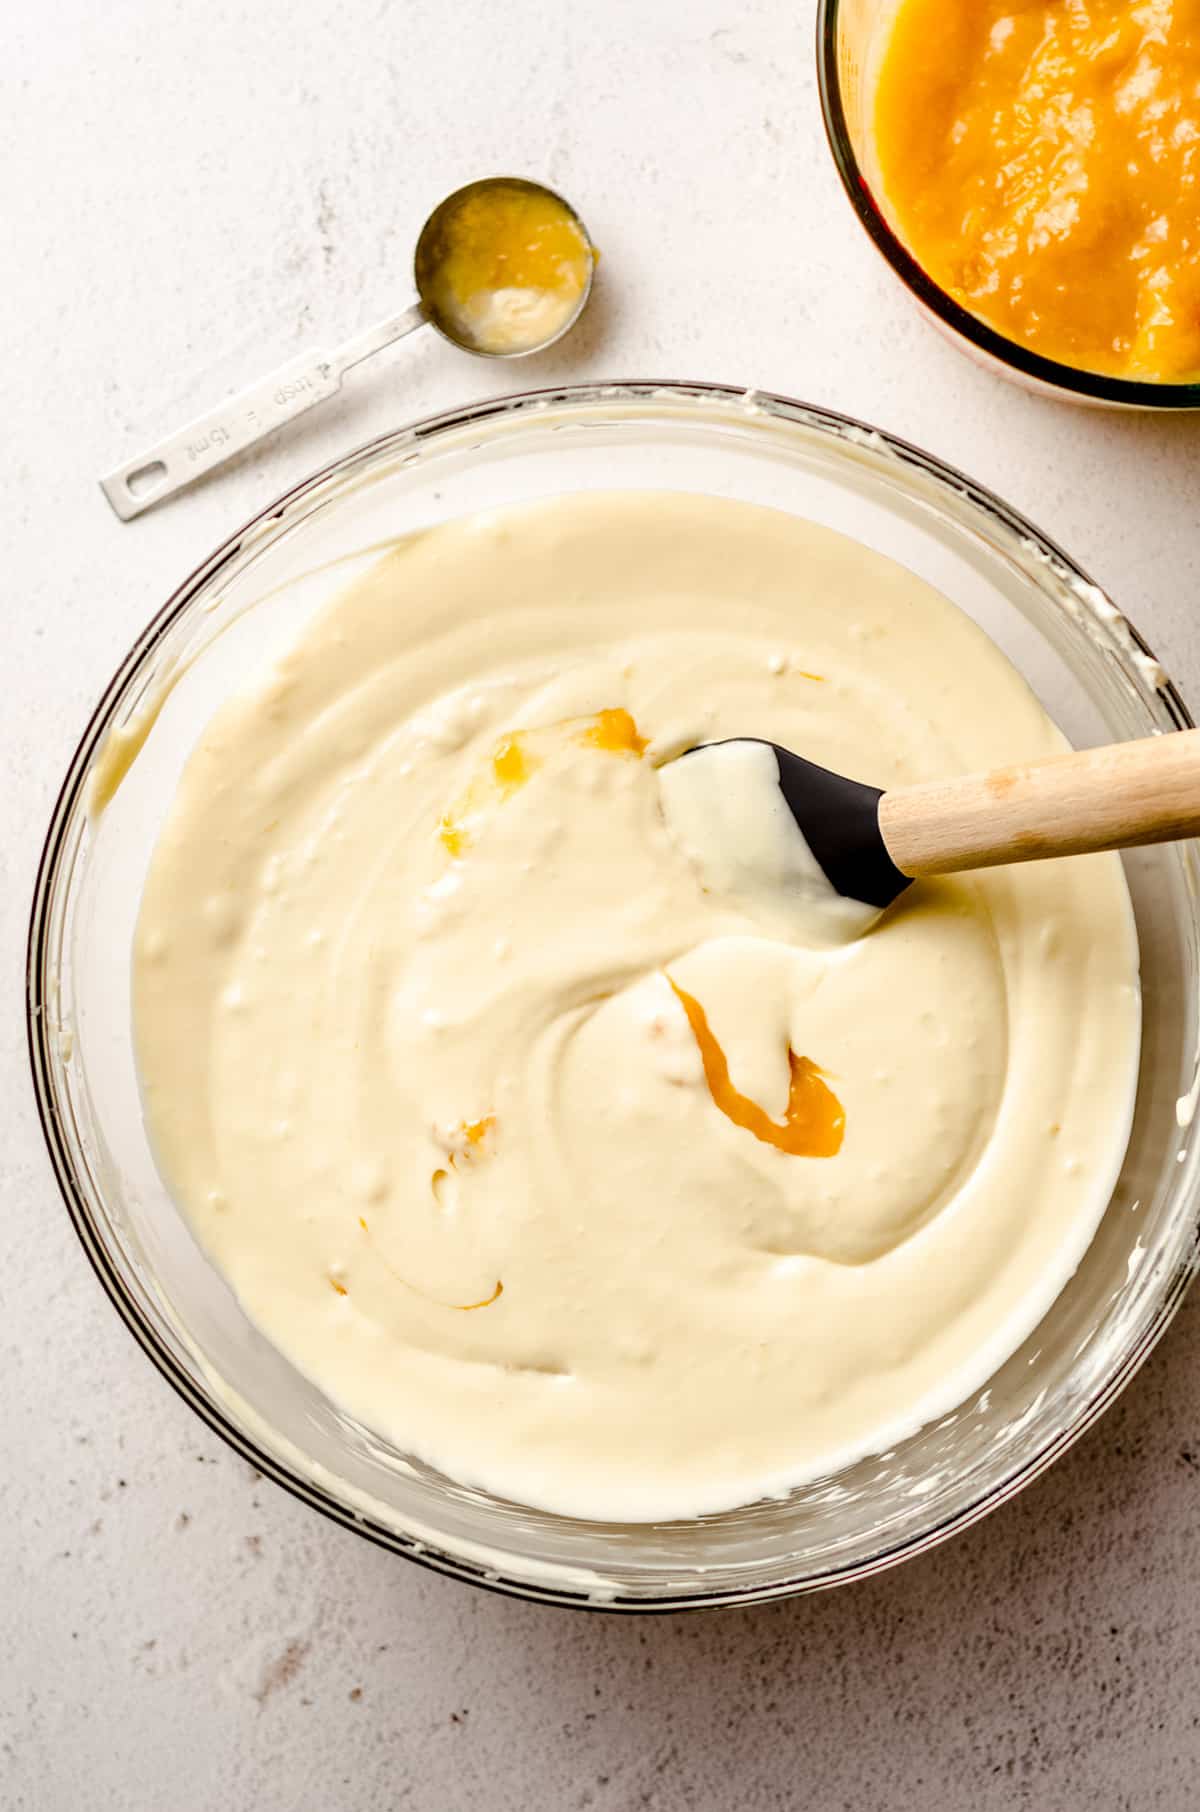 peach cheesecake batter in a large glass bowl